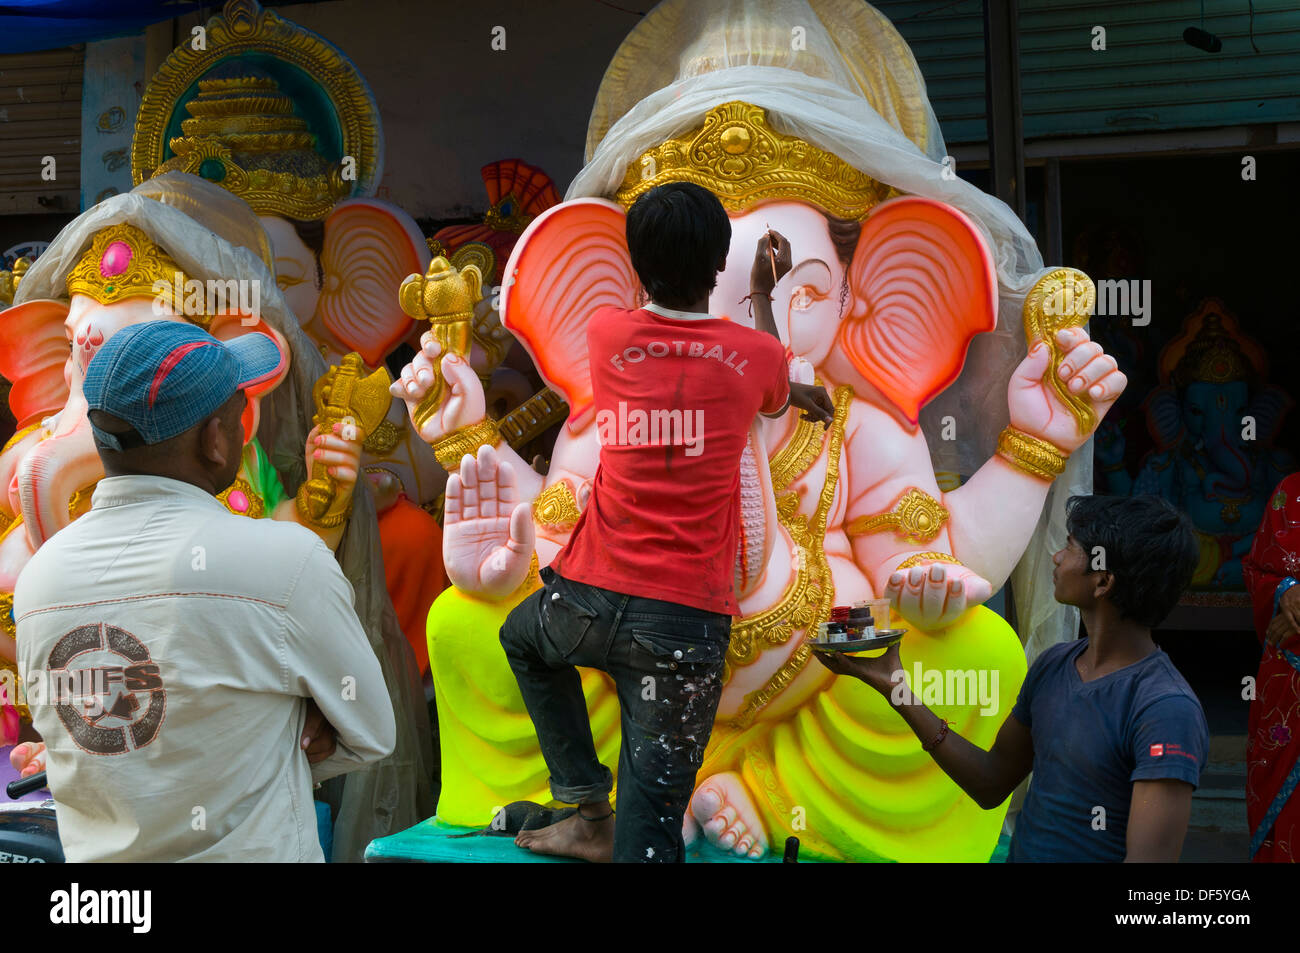 Ganesh idols adorned with flowers and on display for sale on the occasion of Ganesh Chaturthi. The Birthday of Lord Ganesha. Stock Photo